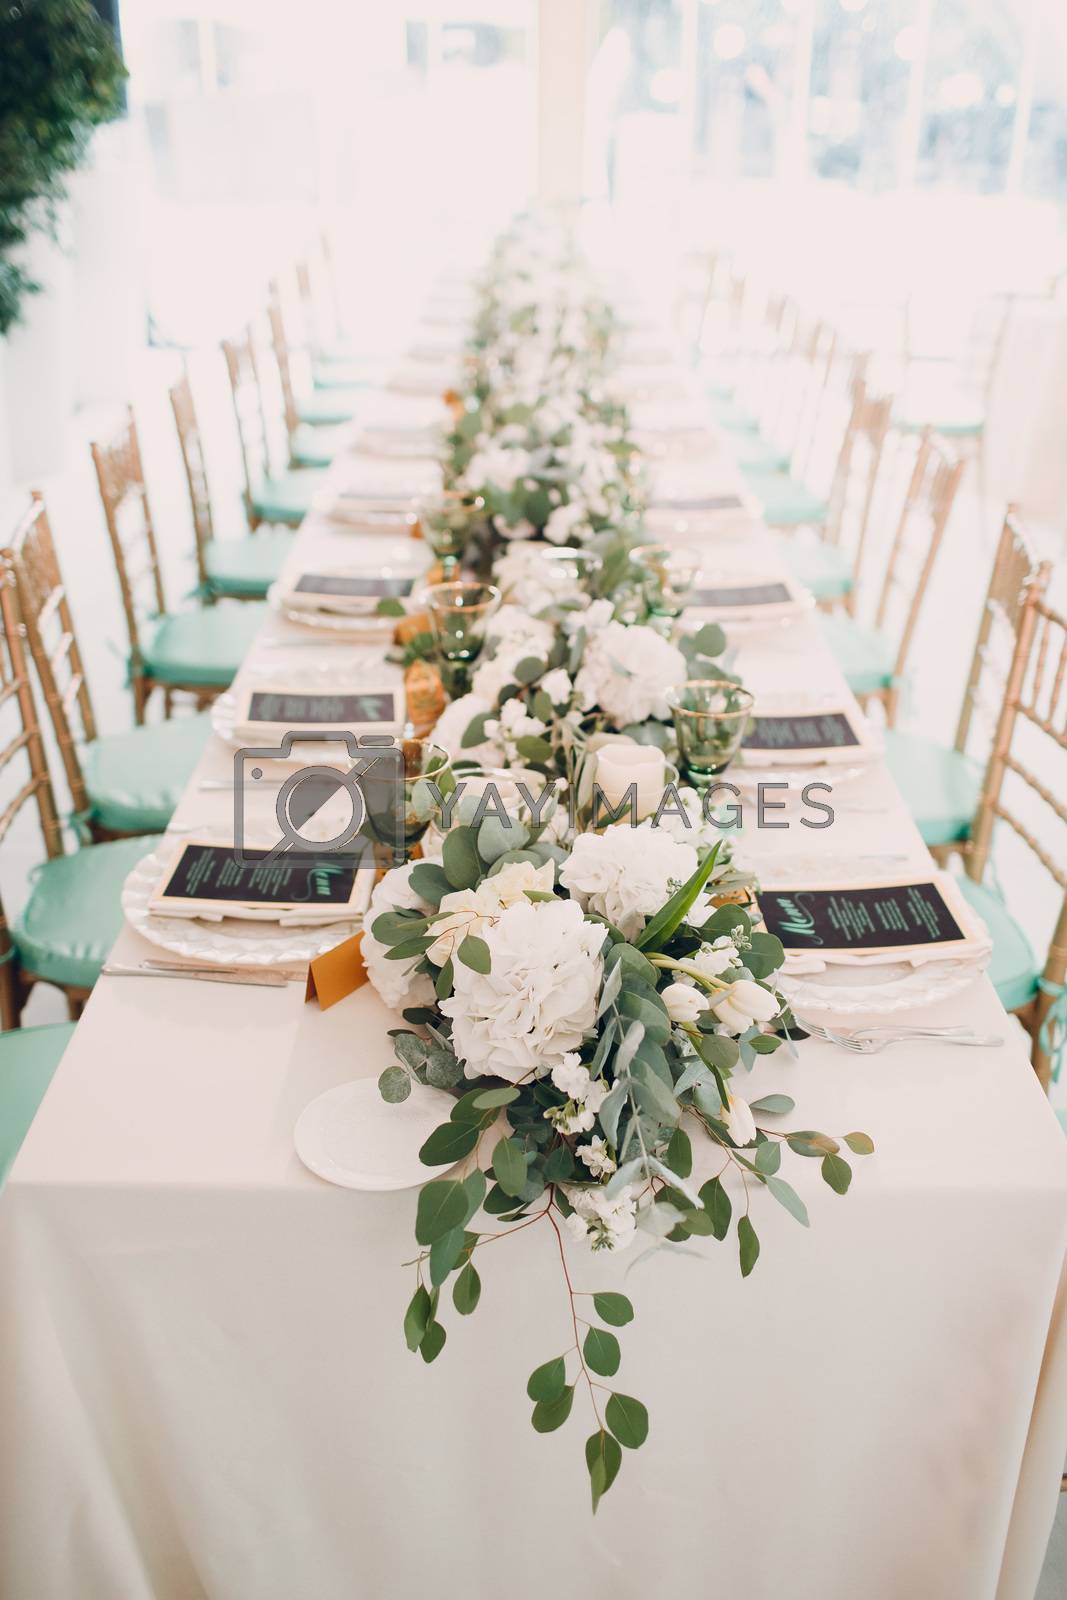 Royalty free image of Wedding table decor by primipil